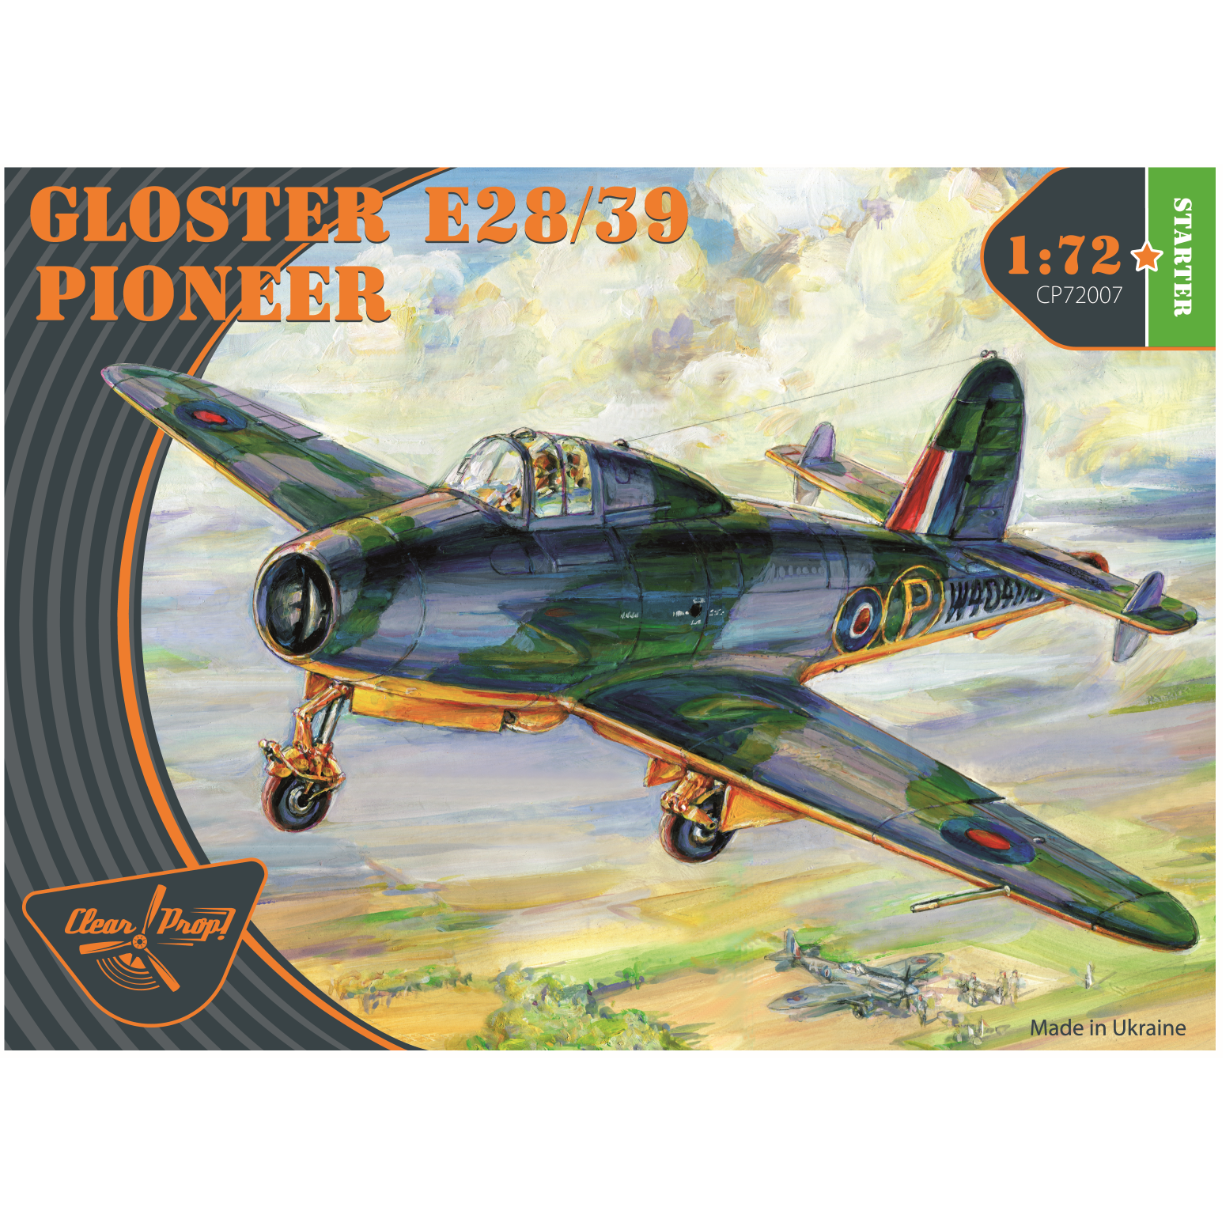 Gloster E28/39 Pioneer 1/72 by Clear Prop